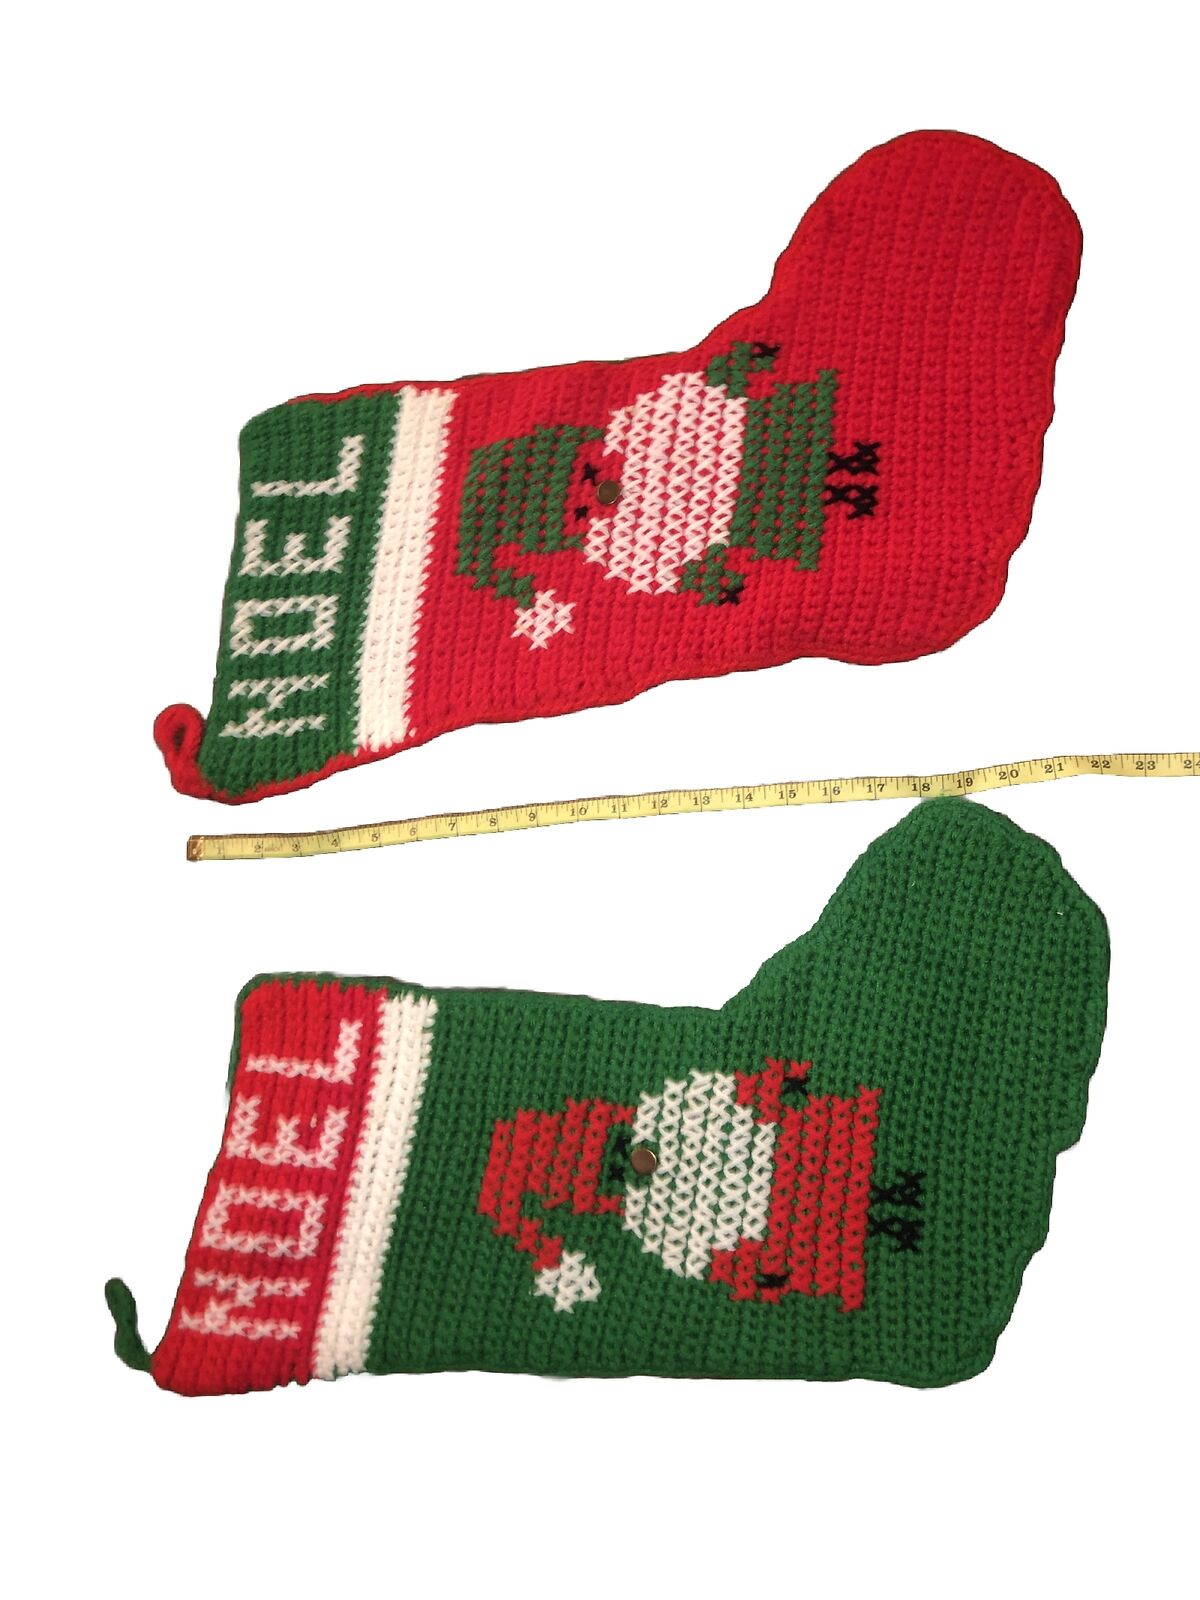 Large Crochet Classic Christmas Stockings Both Included